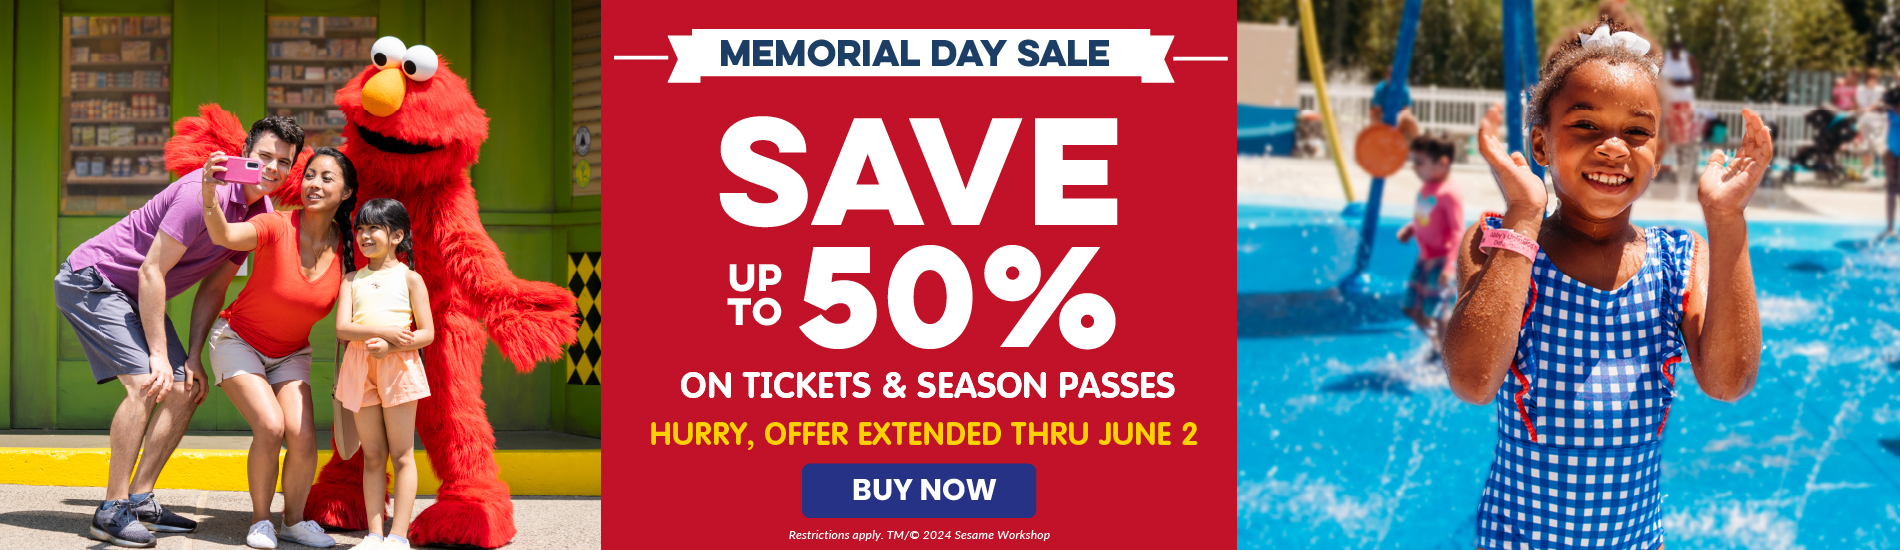 Memorial Day Sale: Save up to 50% on Tickets and Season Passes